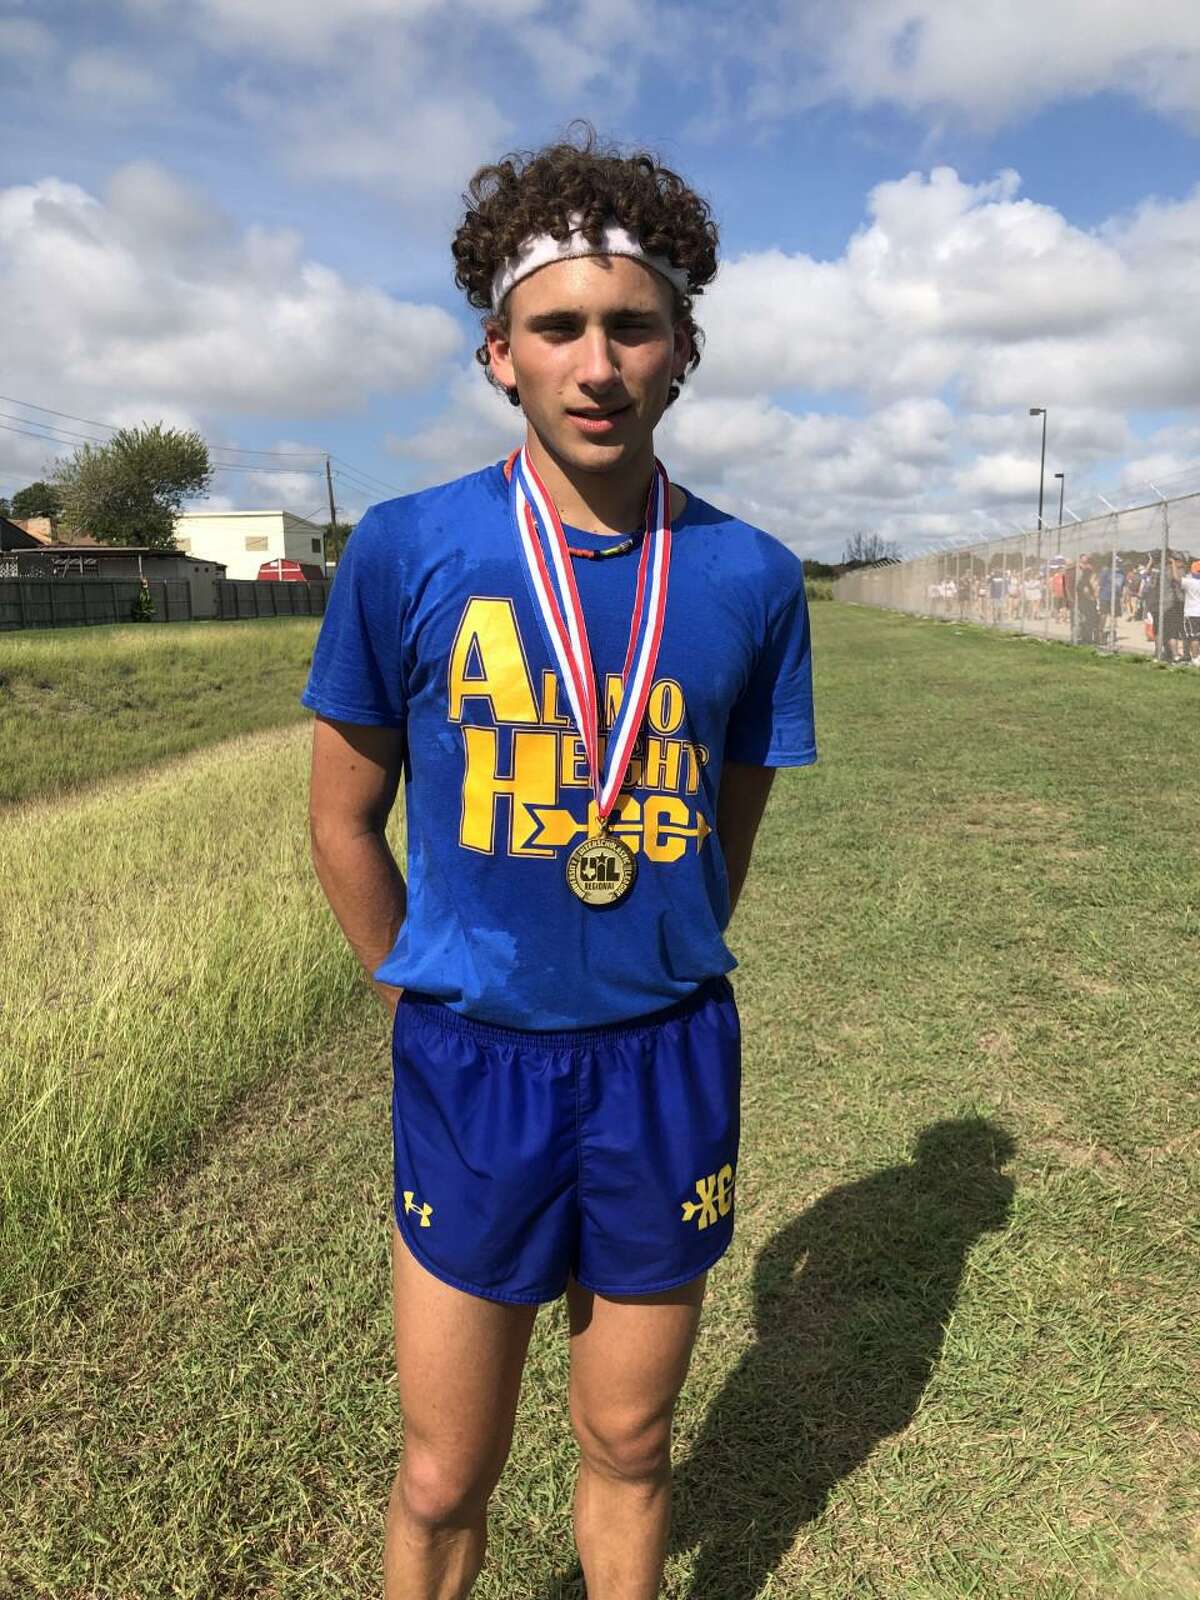 Alamo Heights senior Ethan Feinstein poses with medal he earned for winning the Region IV-5A cross country individual championship on Monday, Oct 25, 2021 at Texas A&M-CorpusChristi.